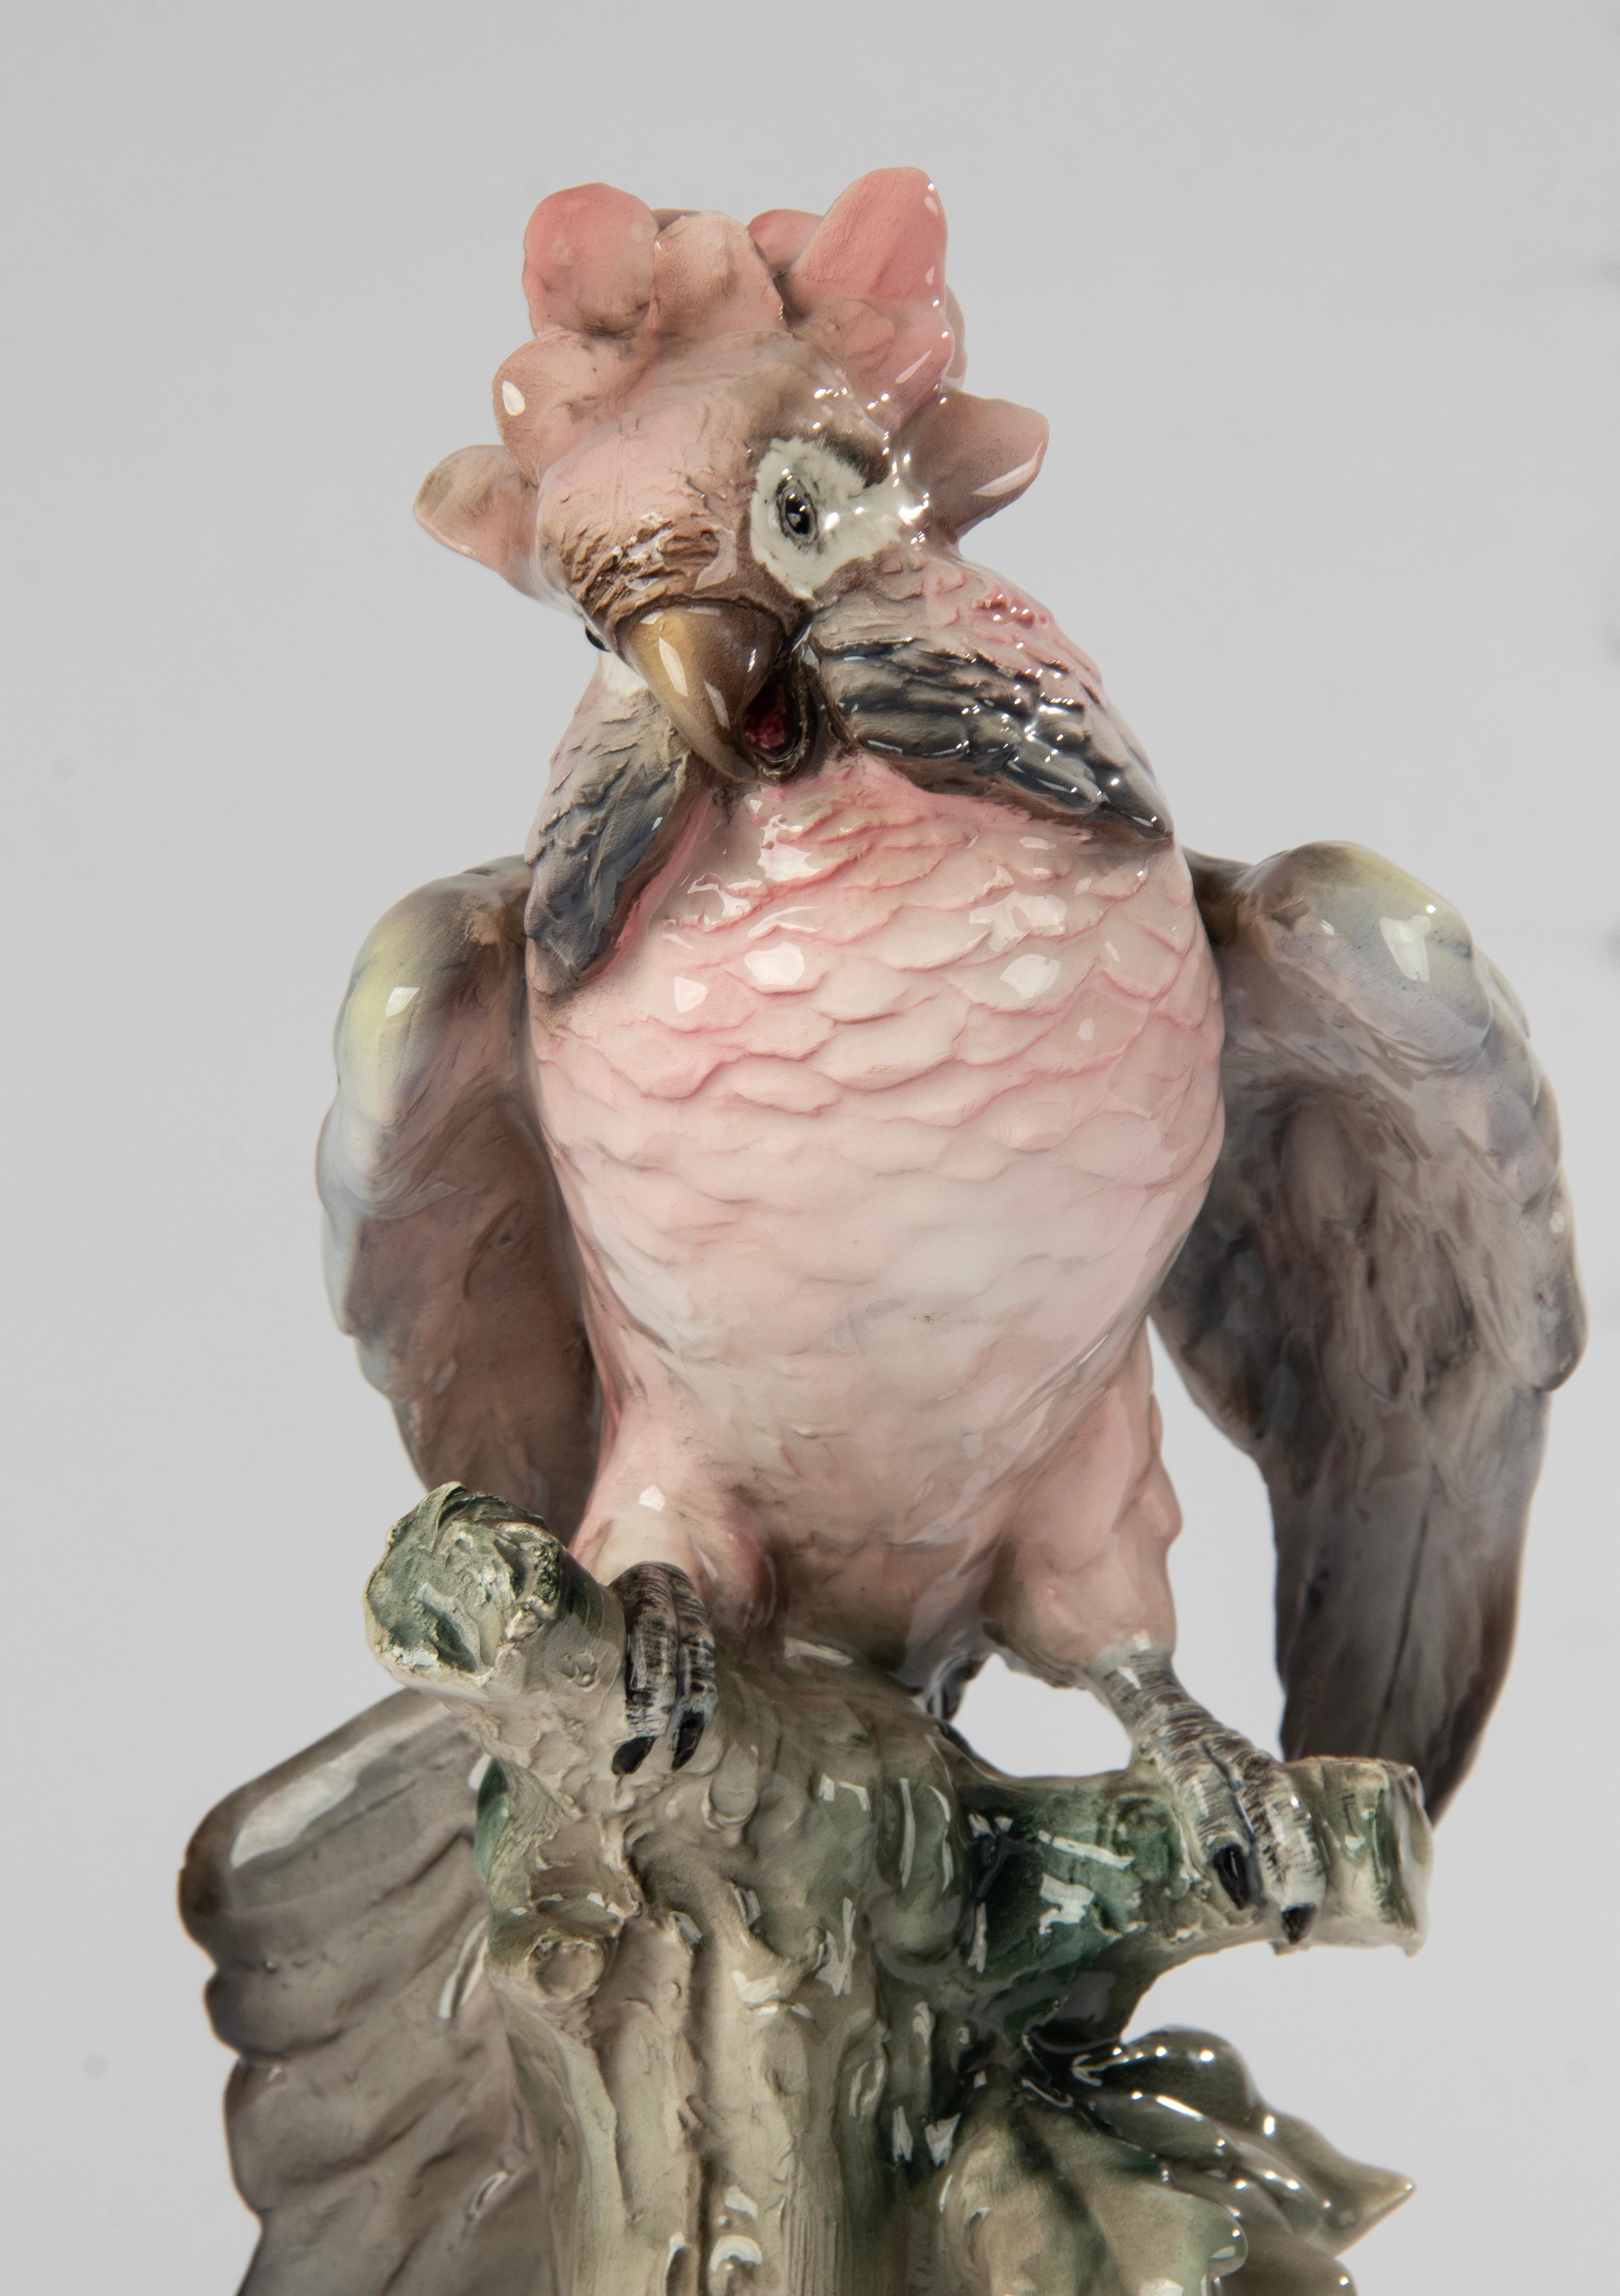 A beautiful ceramic sculpture of a parrot. 
Made in Italy, dating from circa 1960. 
The sculpture has a beautiful, somewhat rough structure and a special color palette. Finished with a glossy glaze.
The statue is in perfect condition. No damage and